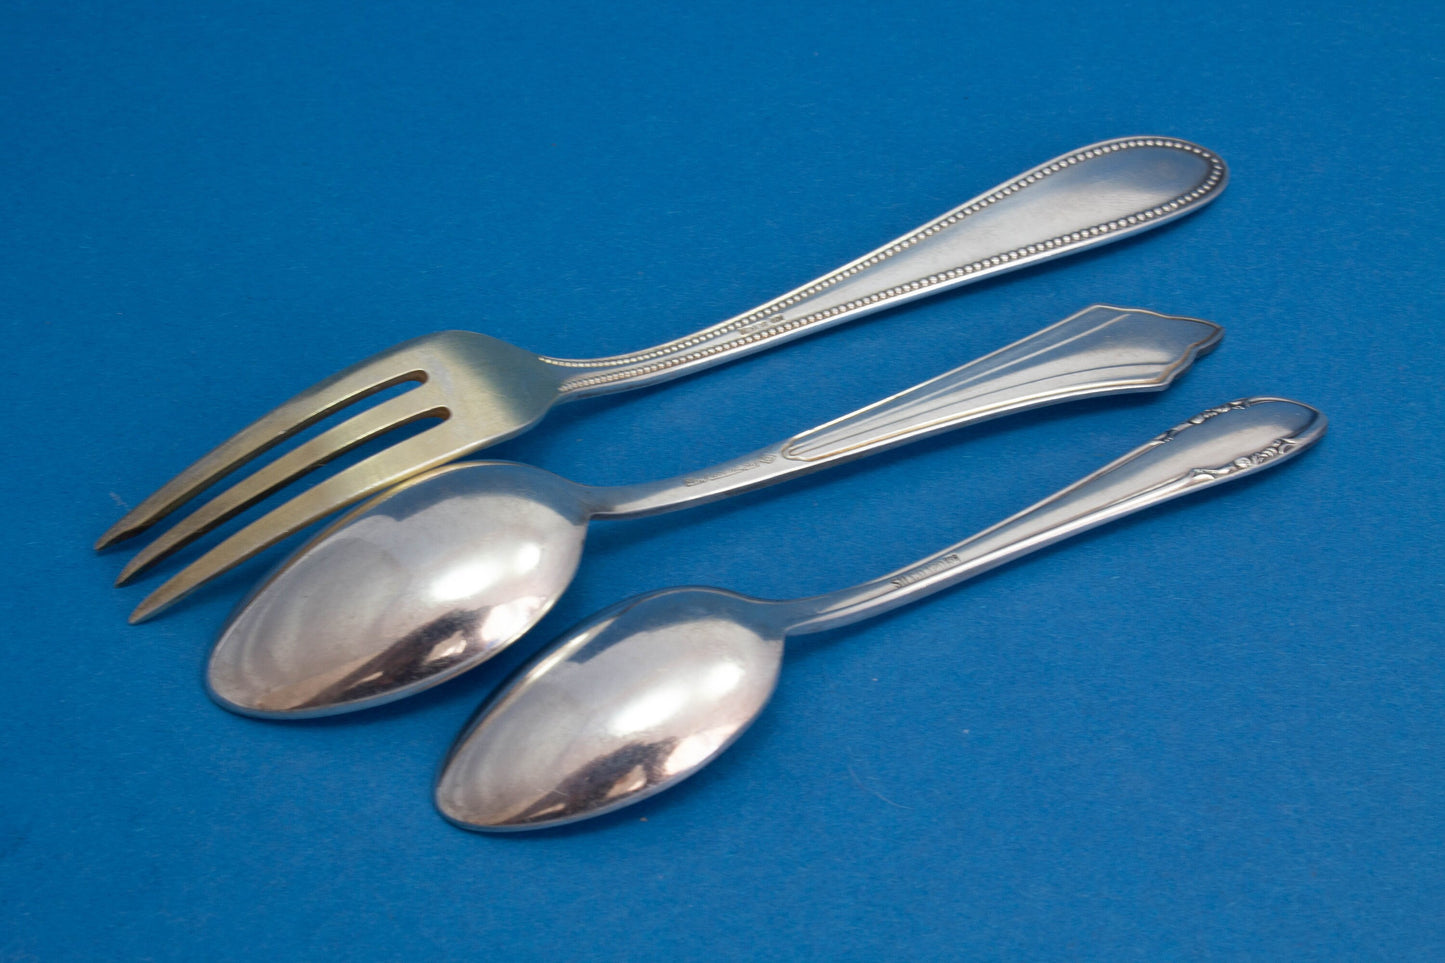 Cutlery set for coffee and cake, silver plated, teaspoon, cake fork, mocha spoon